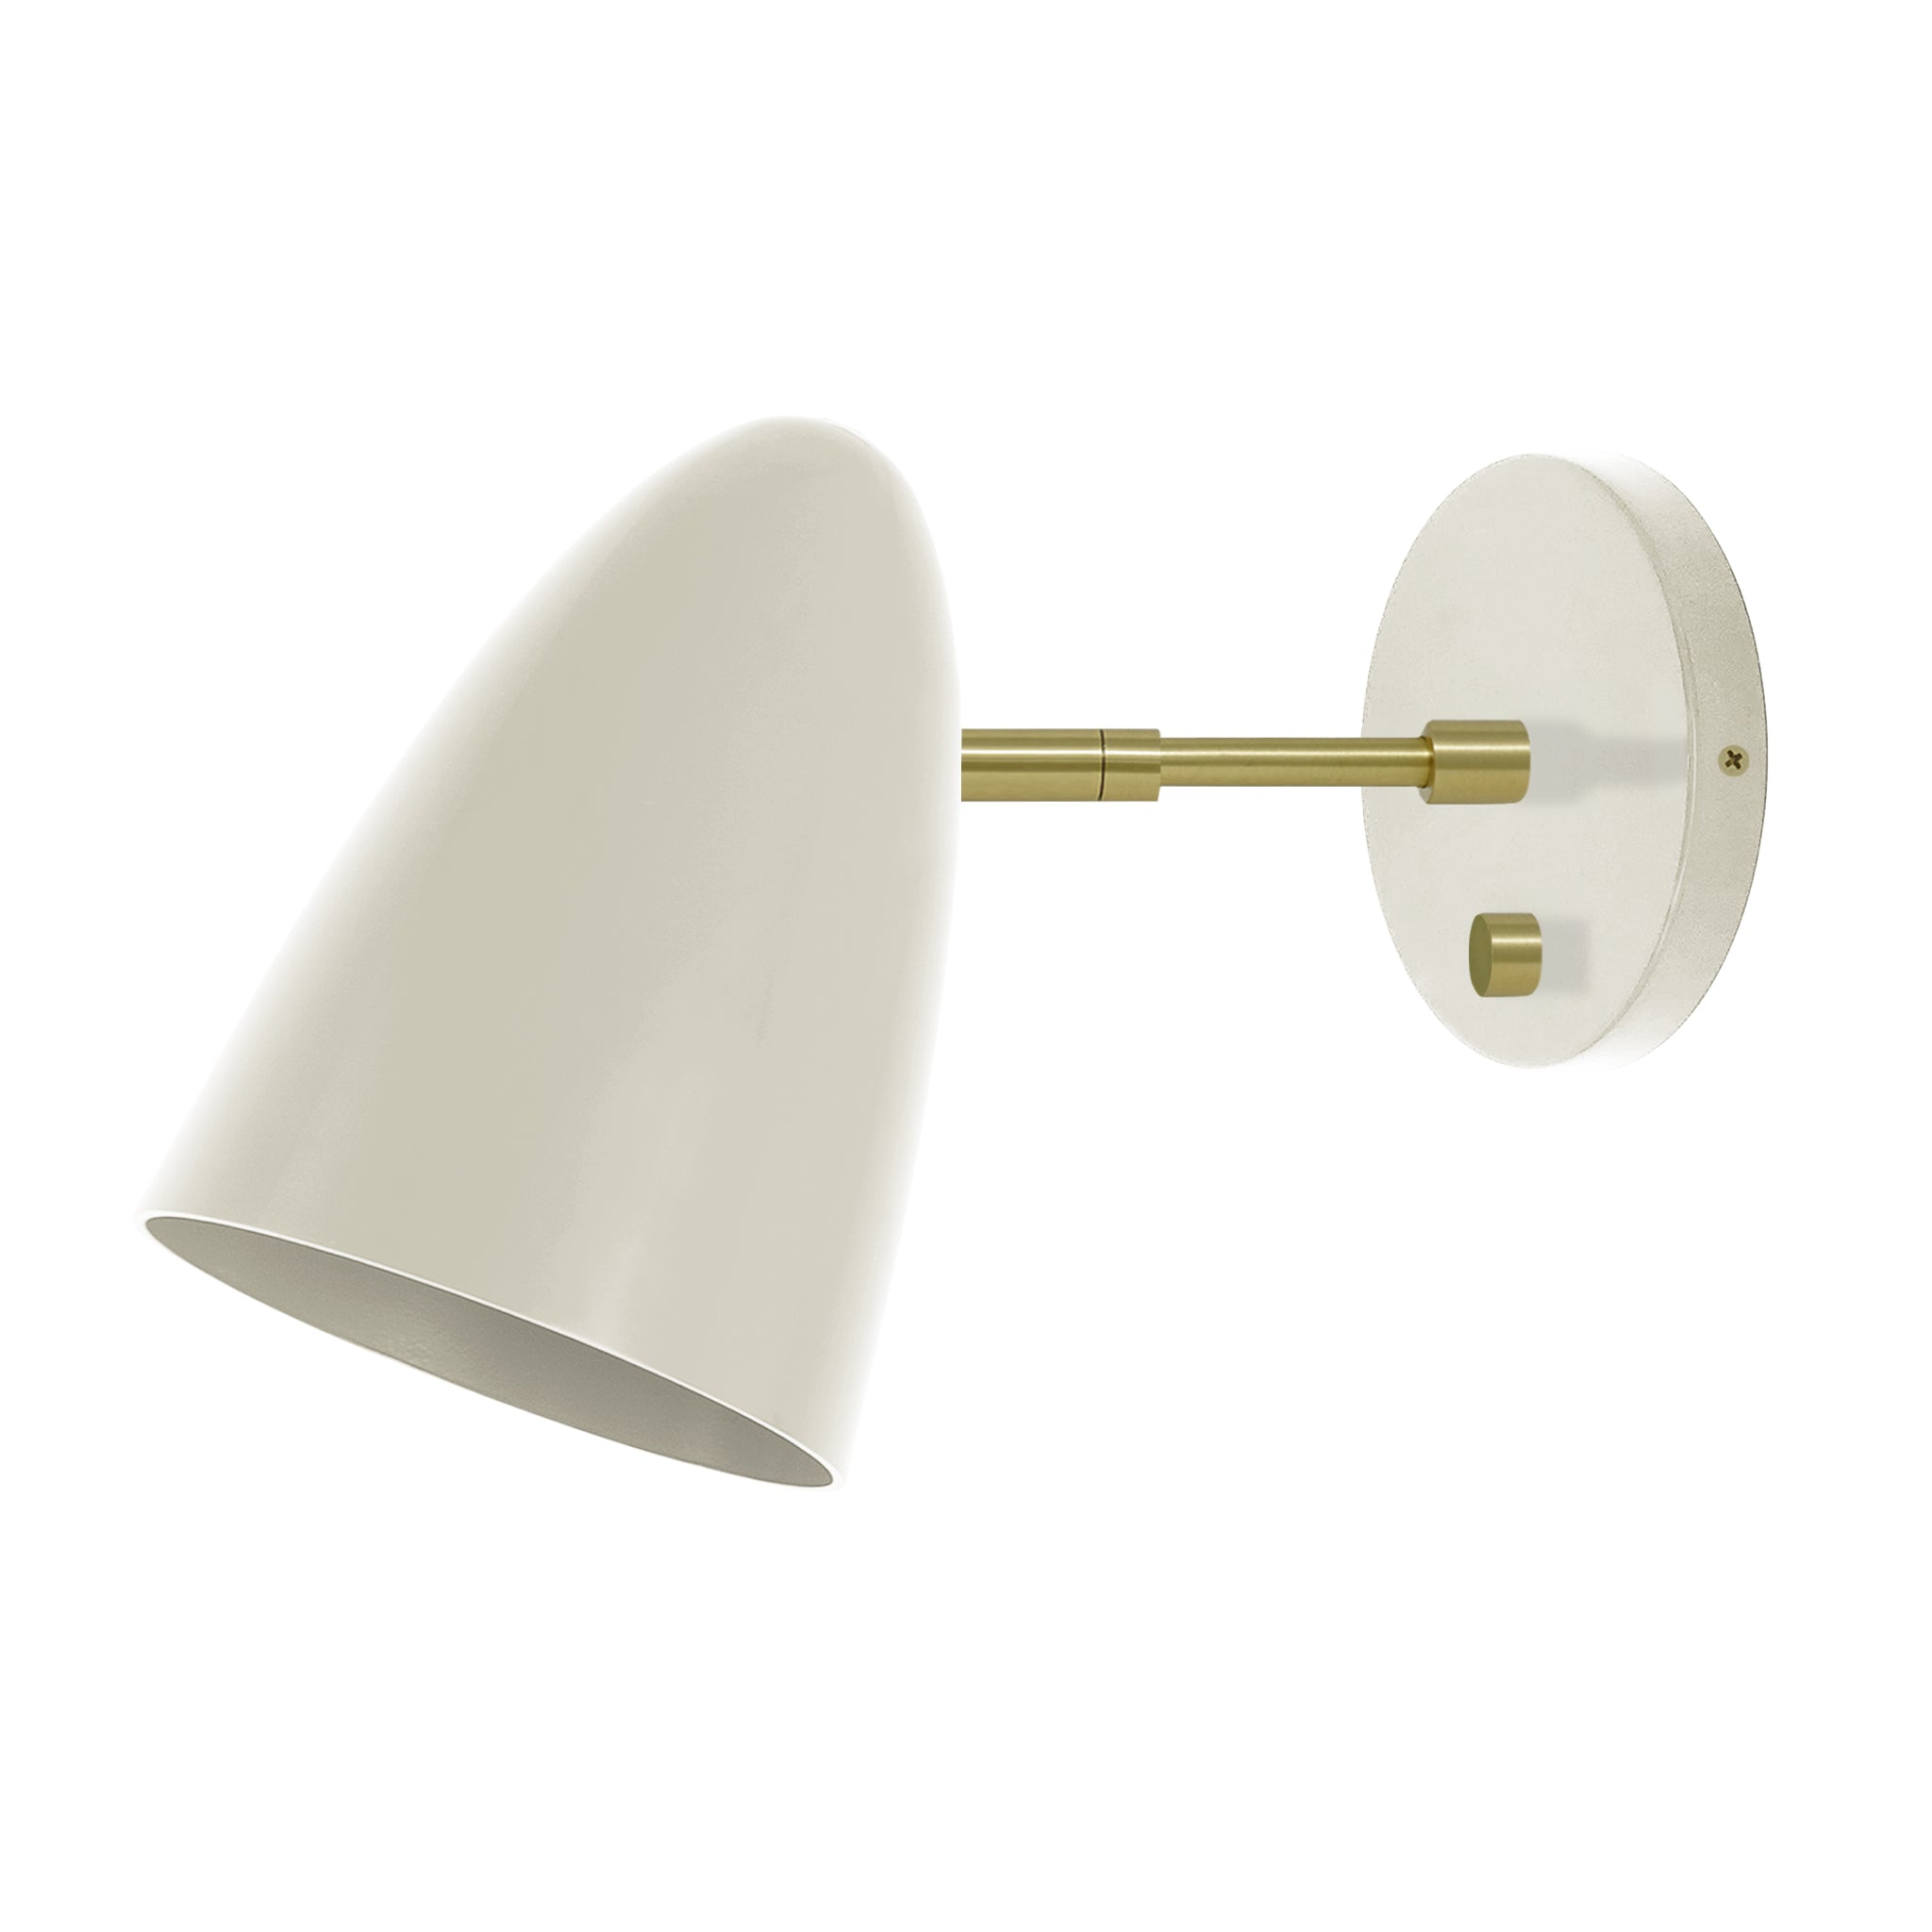 Brass and bone color Boom sconce 3" arm Dutton Brown lighting